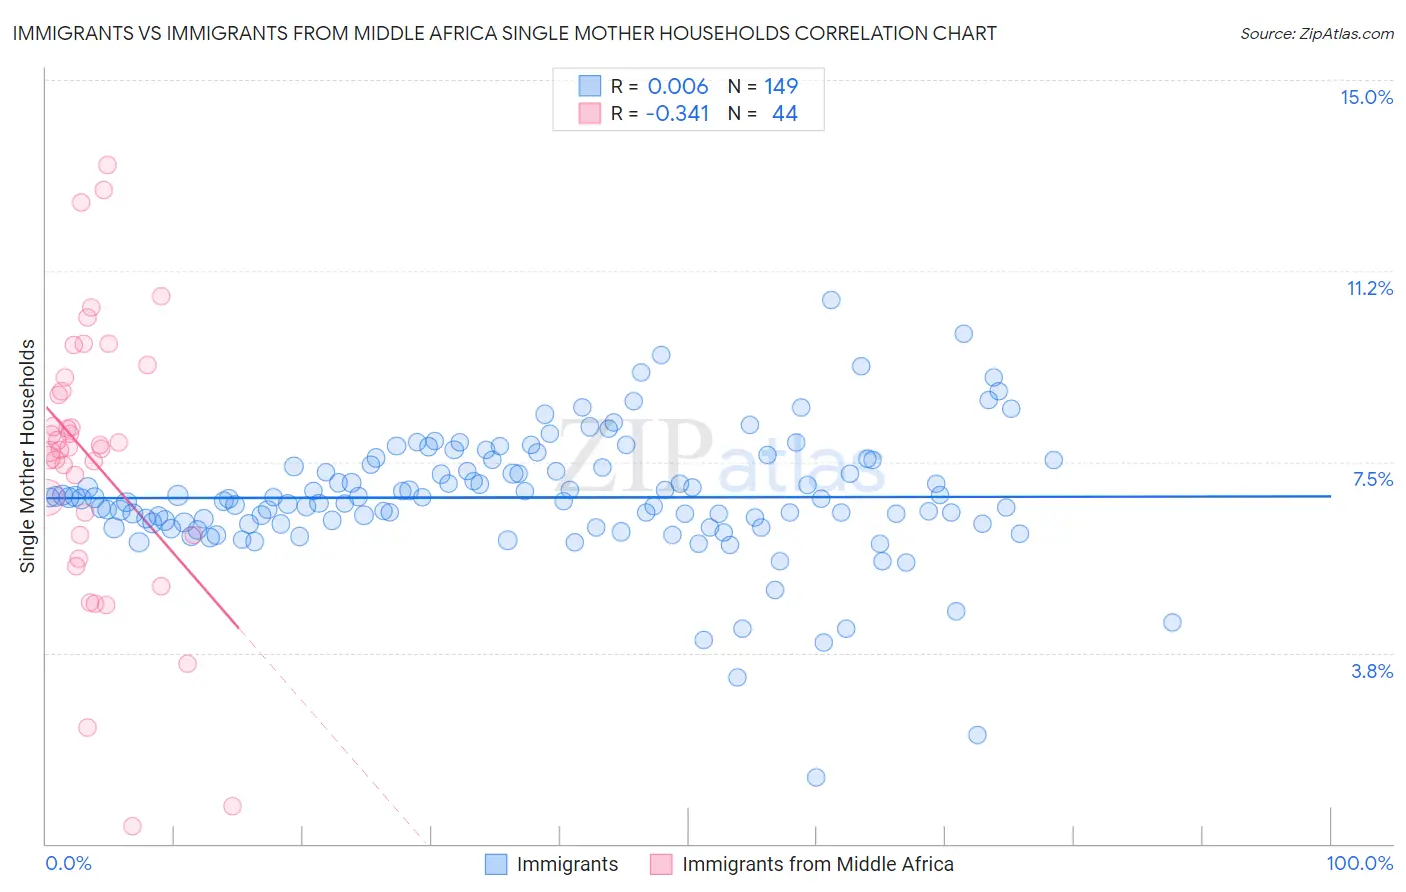 Immigrants vs Immigrants from Middle Africa Single Mother Households